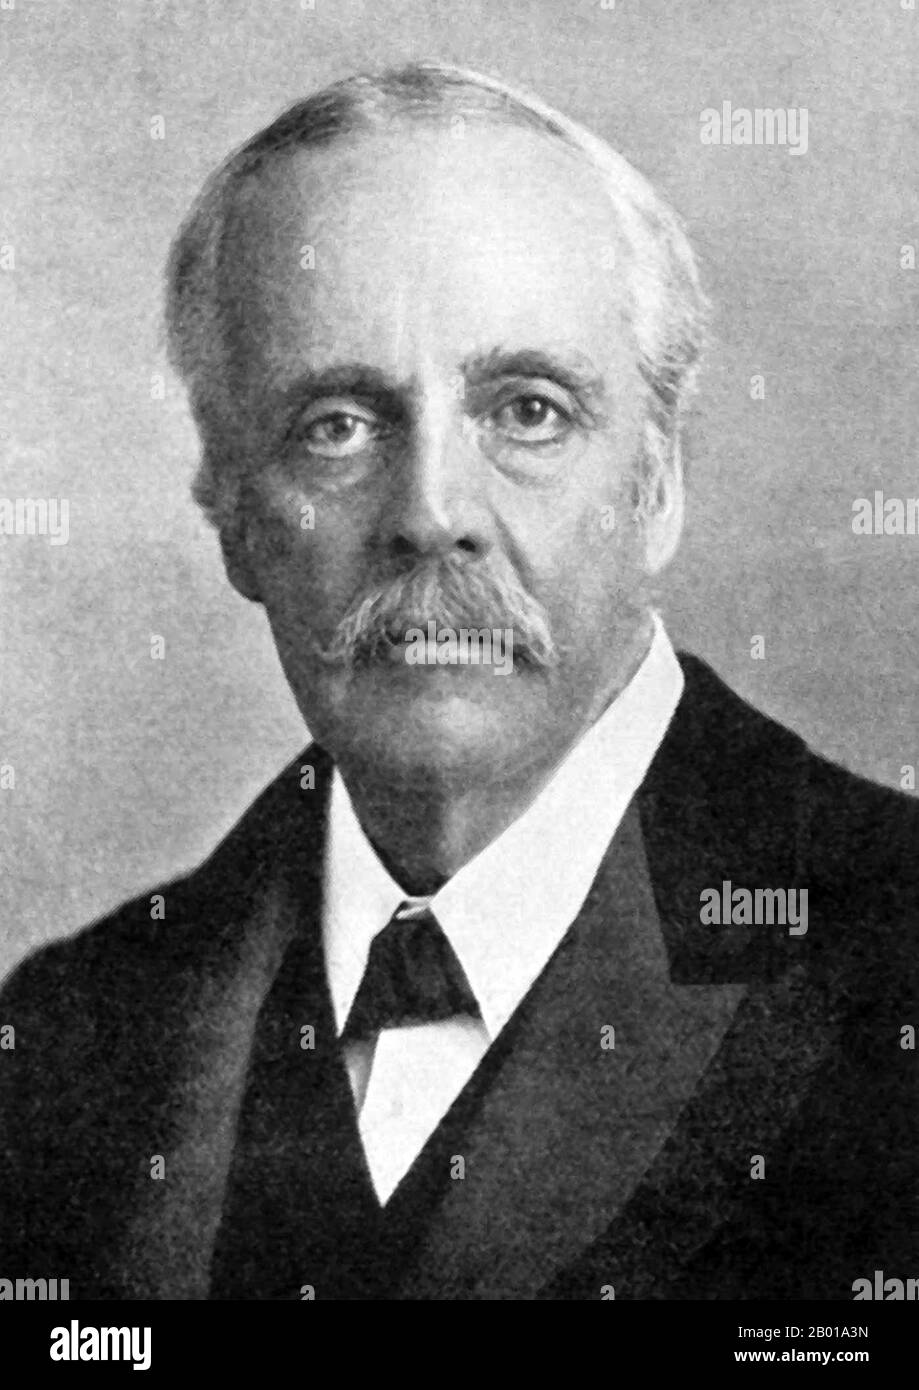 Scotland/UK: Arthur James Balfour, 1st Earl of Balfour (25 July 1848 - 19 March 1930), c. 1910s.  Arthur James Balfour, 1st Earl of Balfour, was a British Conservative politician and statesman. He served as the Prime Minister of the United Kingdom from July 1902 to December 1905, and as Leader of the Conservative Party from his appointment as Prime Minister to November 1911. He was a Member of Parliament from 1874 to 1922 and served as Foreign Secretary in David Lloyd George's coalition government of 1916-1919. Stock Photo